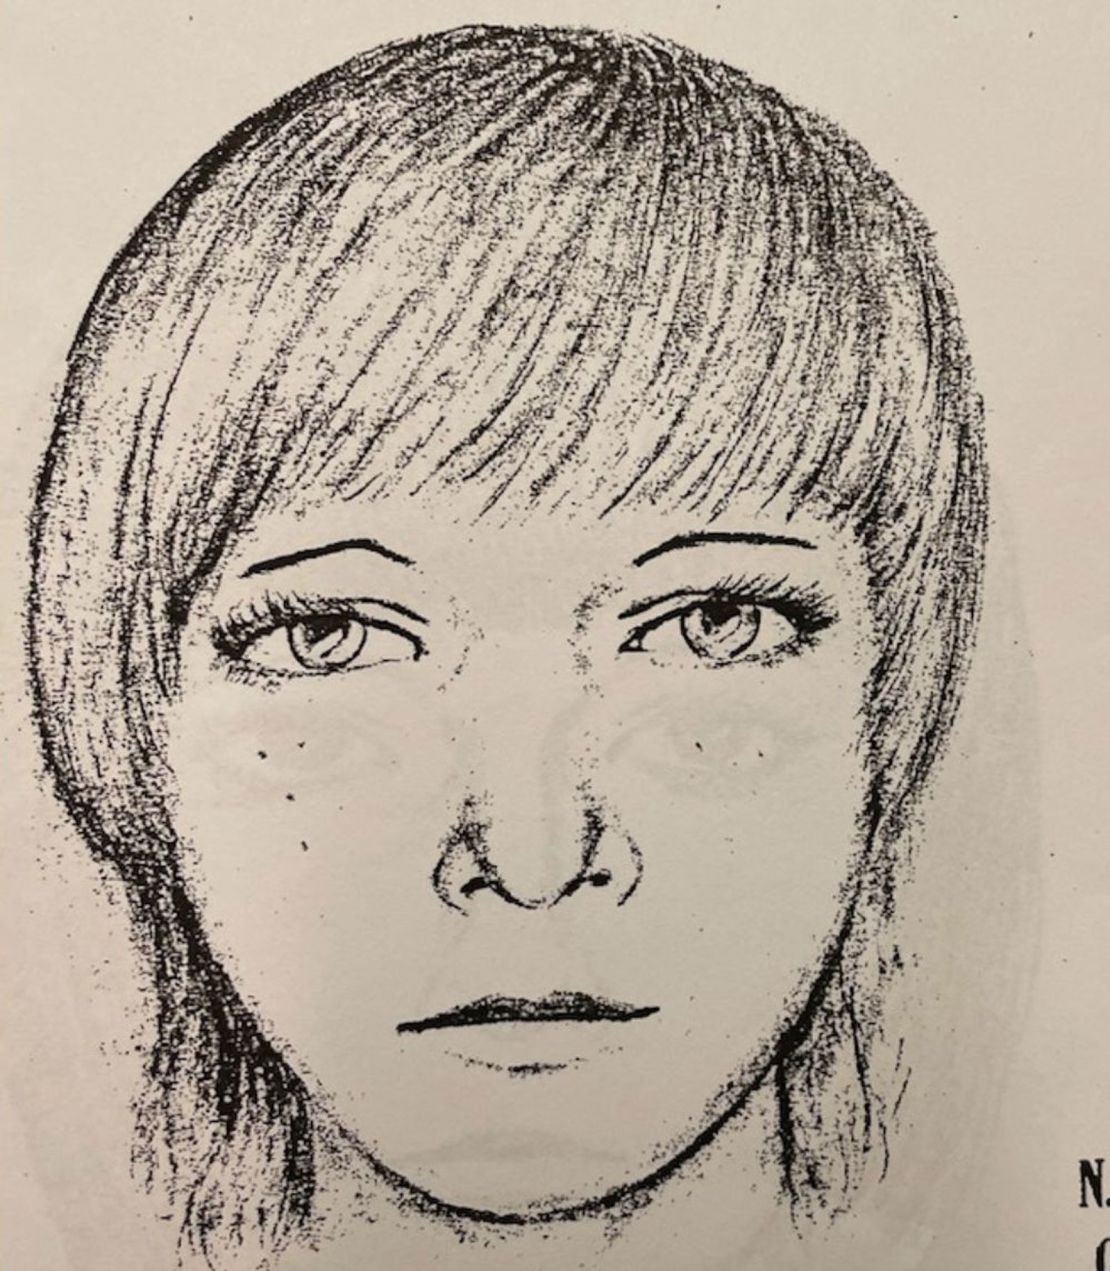 This sketch was used to help identify the murdered woman in 1974, a few years after skeletal remains of two victims were found in a shallow grave in Ledyard, Connecticut.